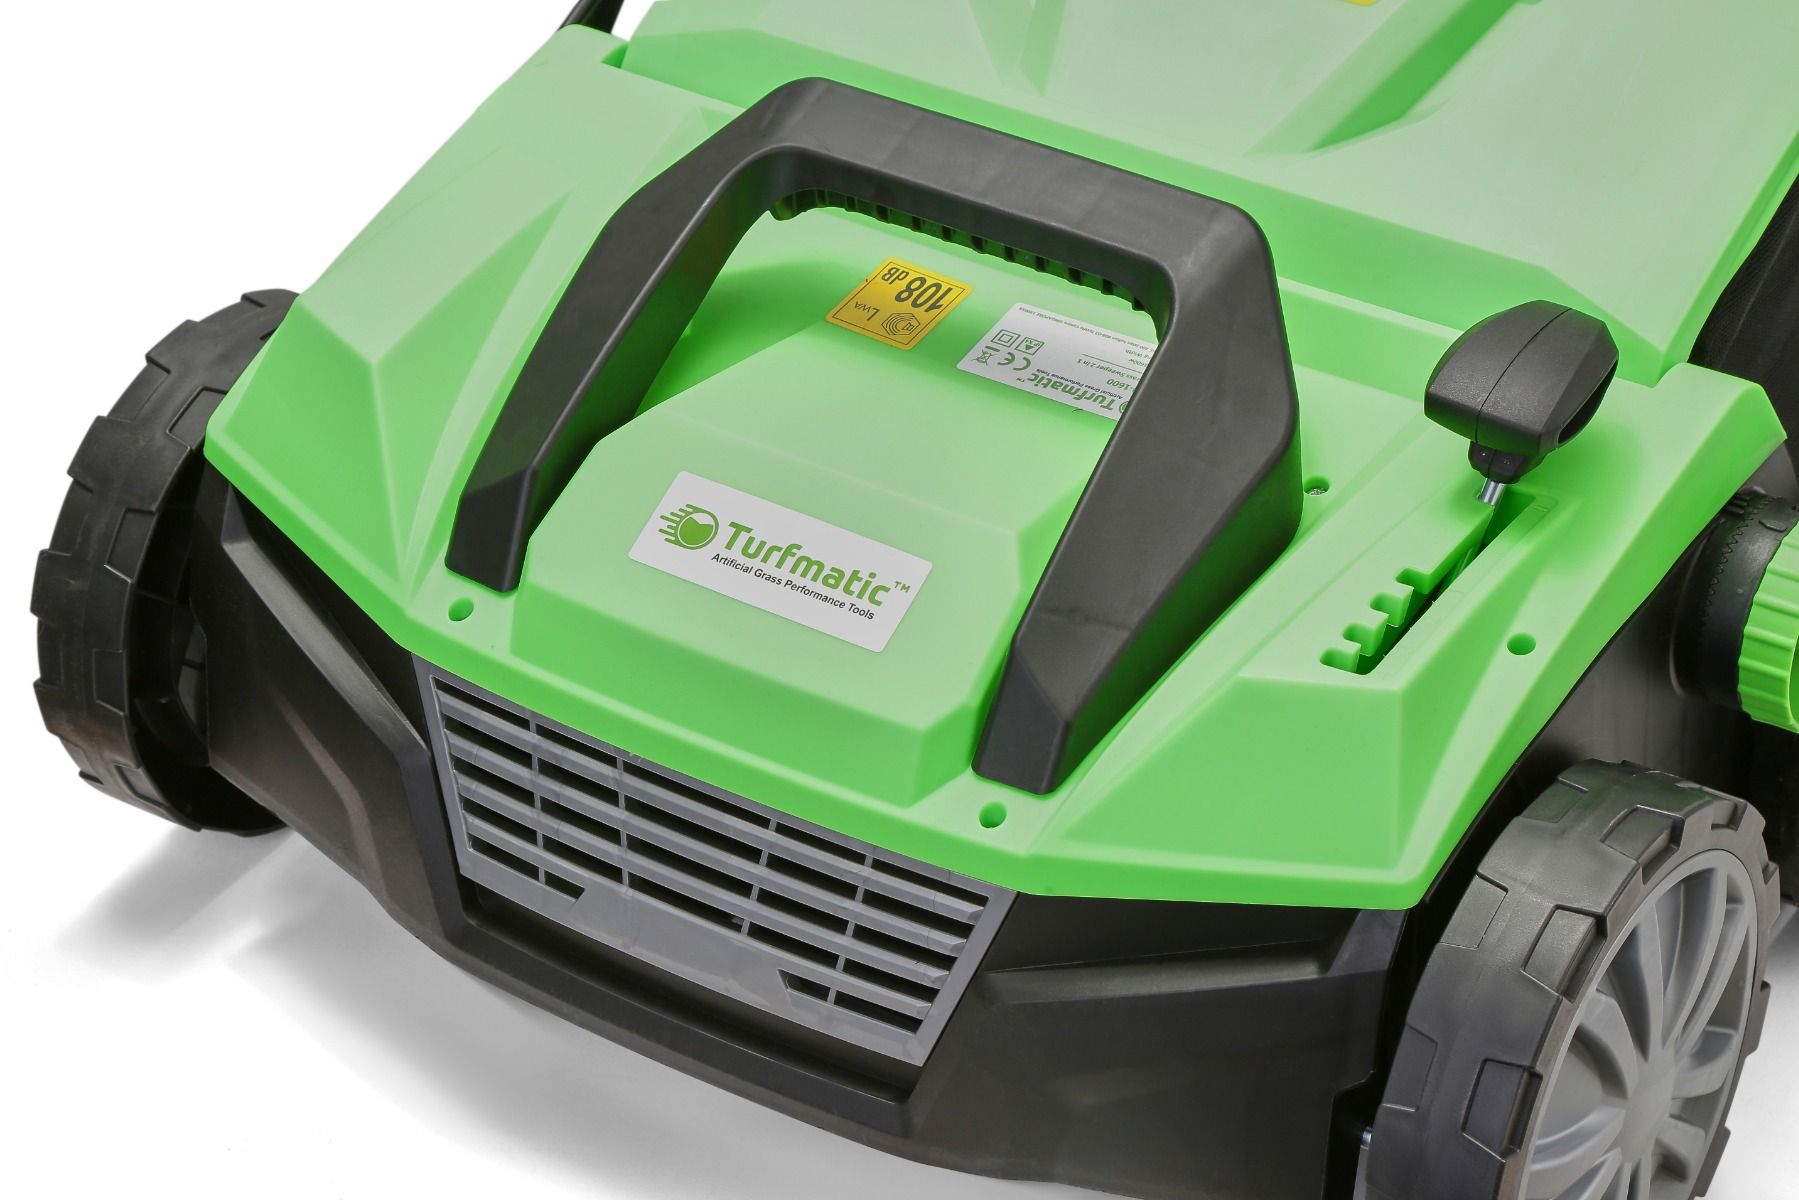 Turfmatic™ 380 Artificial Grass Sweeper 2 in 1 - 1800w / 120v - $205